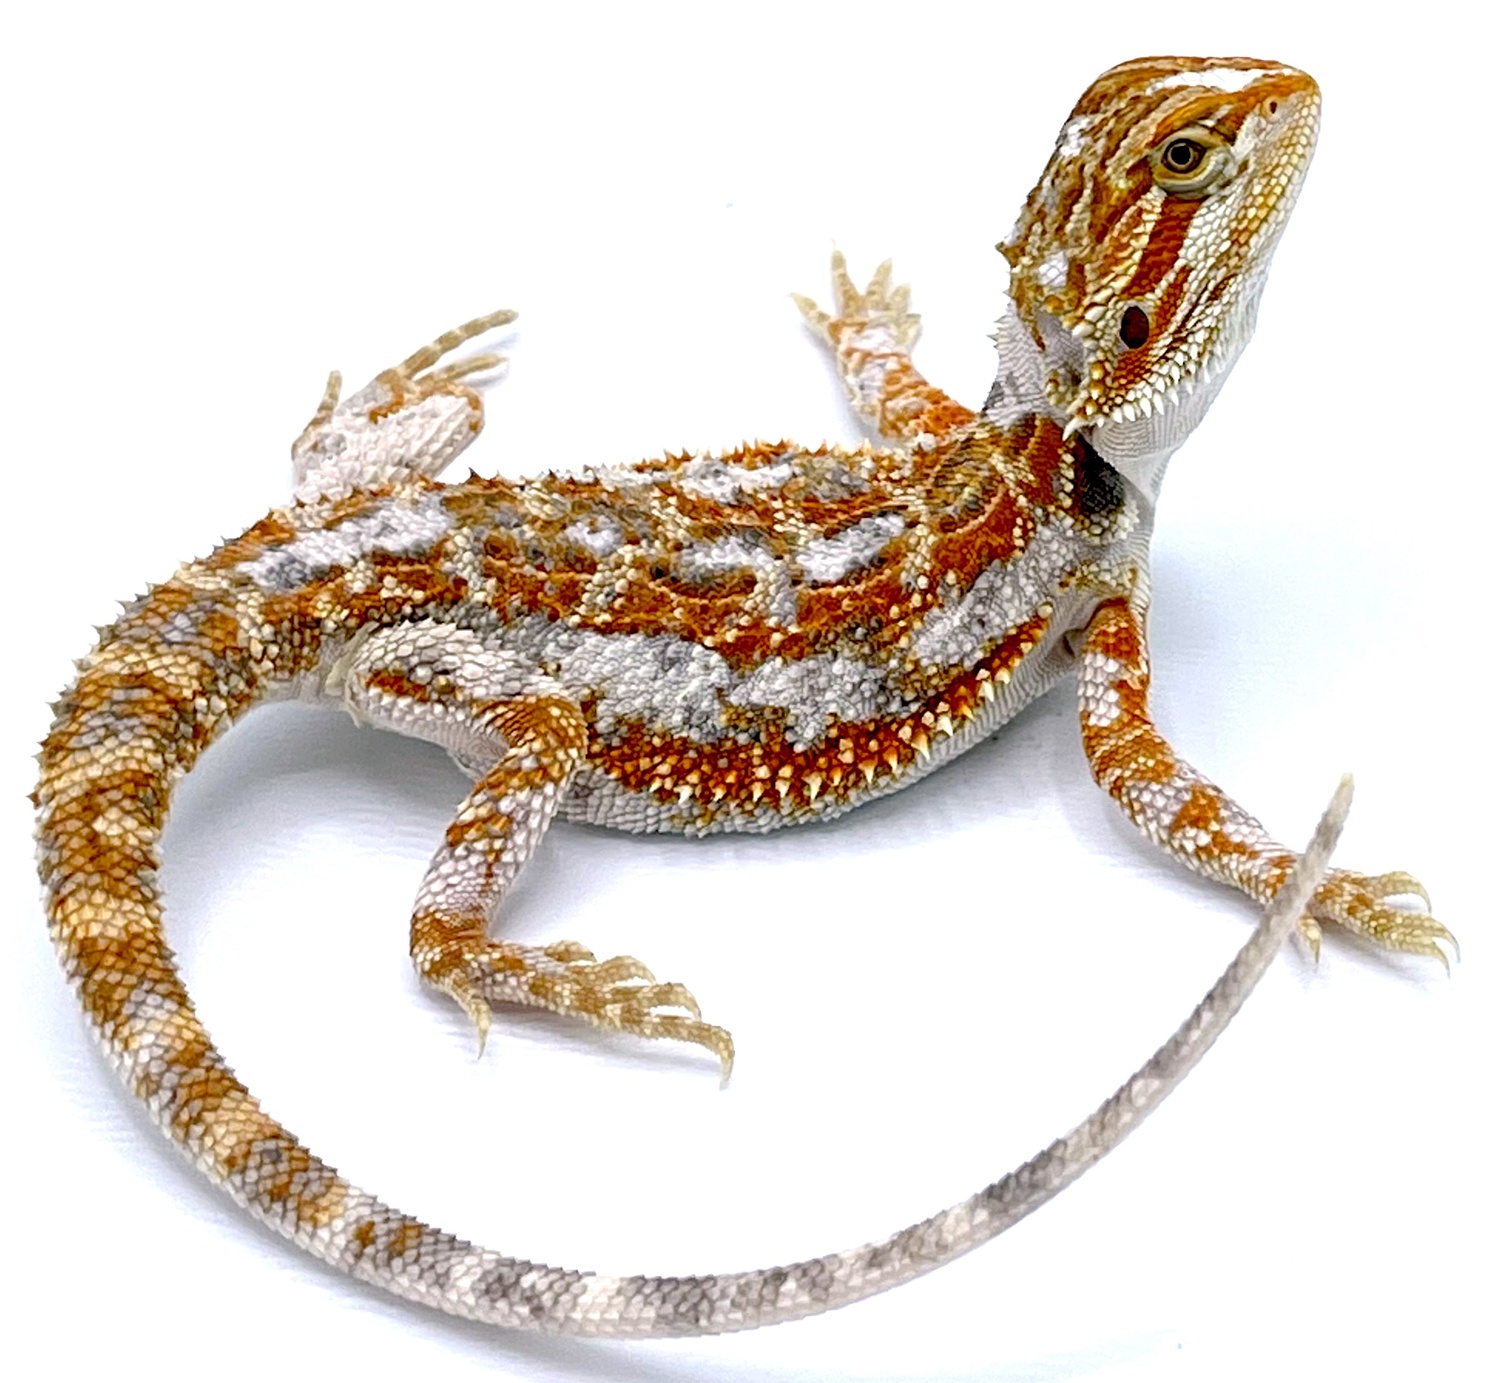 Paradox Bearded Dragon Central Bearded Dragon by Reptile Pets Direct